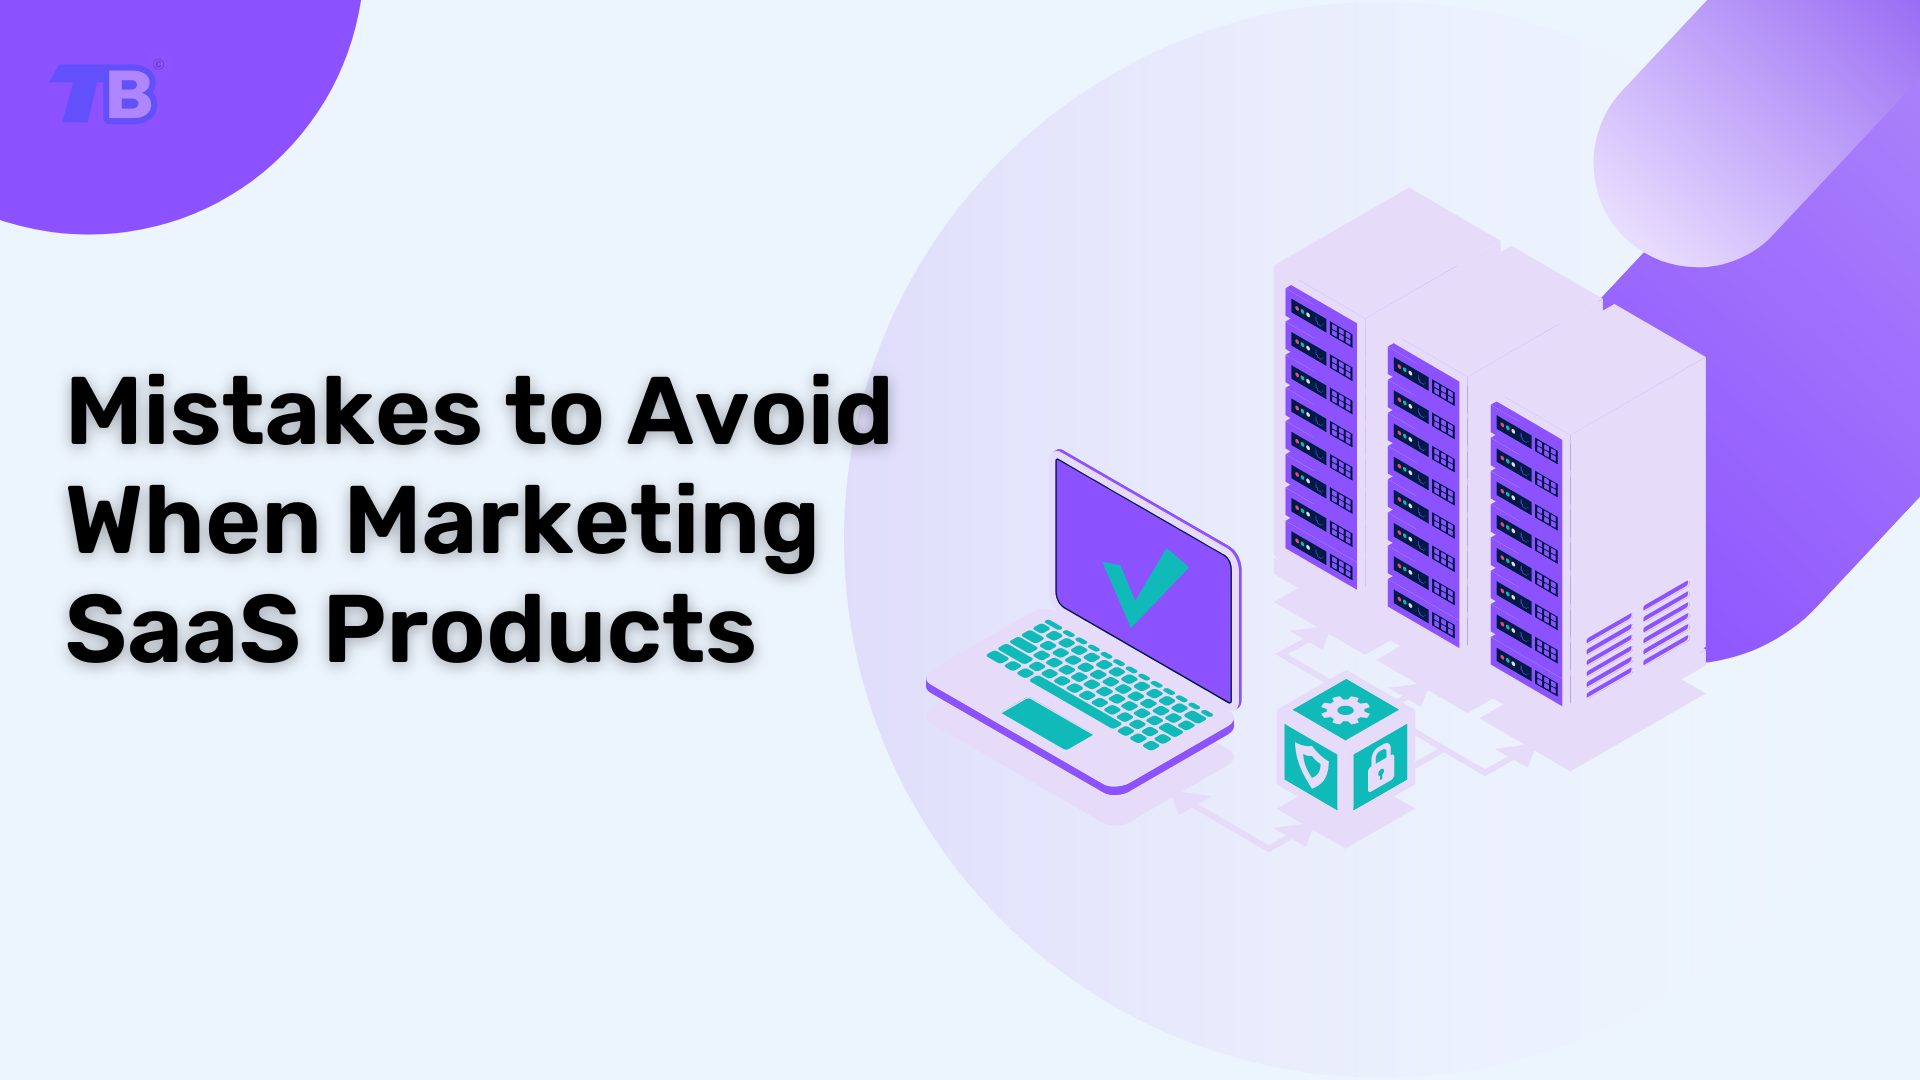 Mistakes to Avoid When Marketing SaaS Products